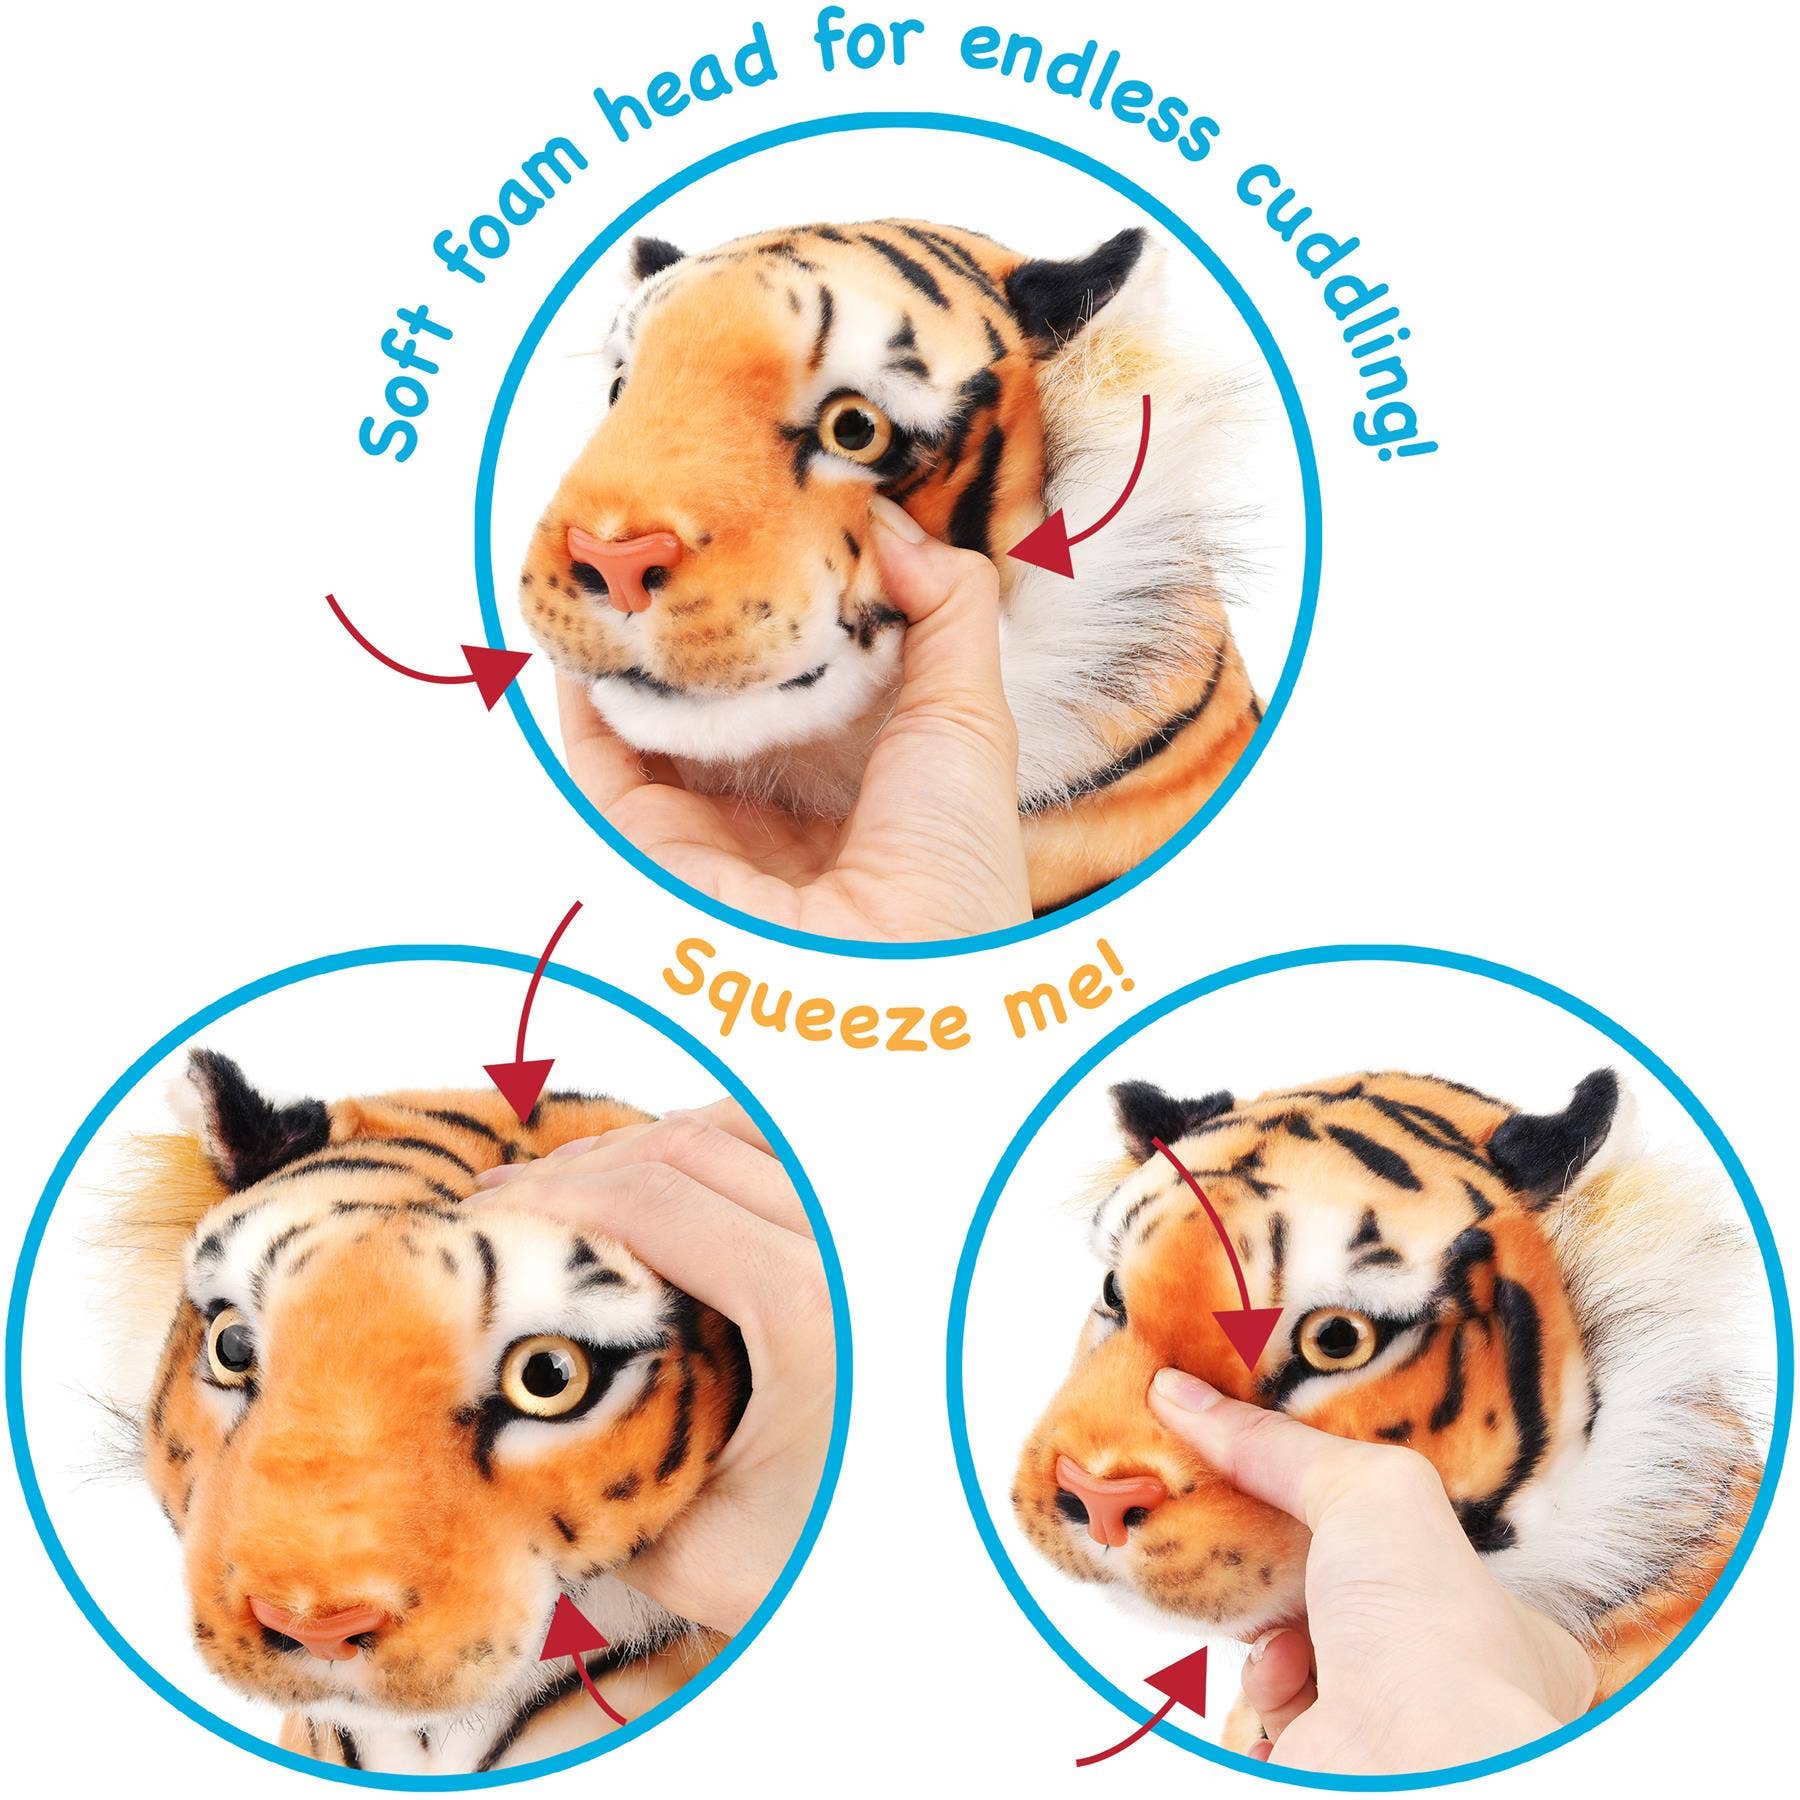 Arrow the Tiger - Squeeze Me! | 17 Inch Stuffed Animal Plush